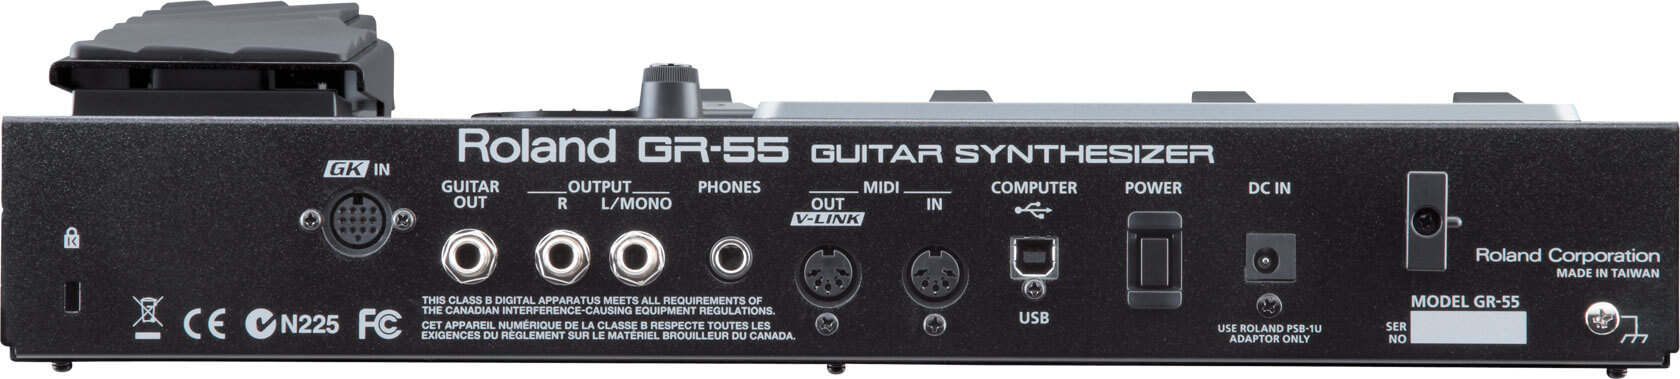 Roland GR-55 Guitar Synthesizer with GK-3 Pickup (Black)